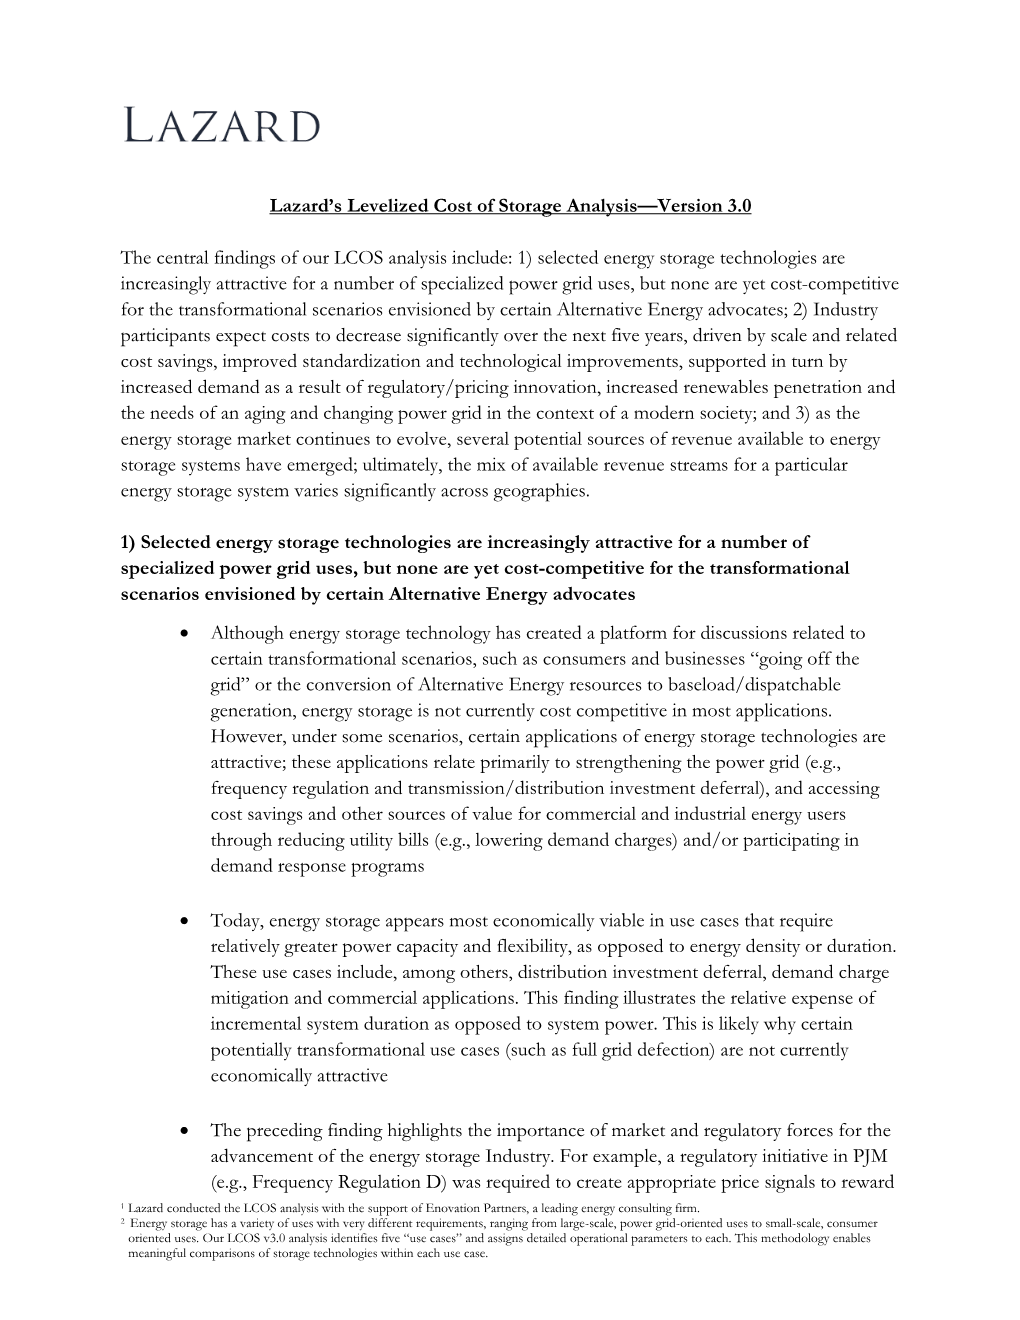 Lazard's Levelized Cost of Storage Analysis—Version 3.0 the Central